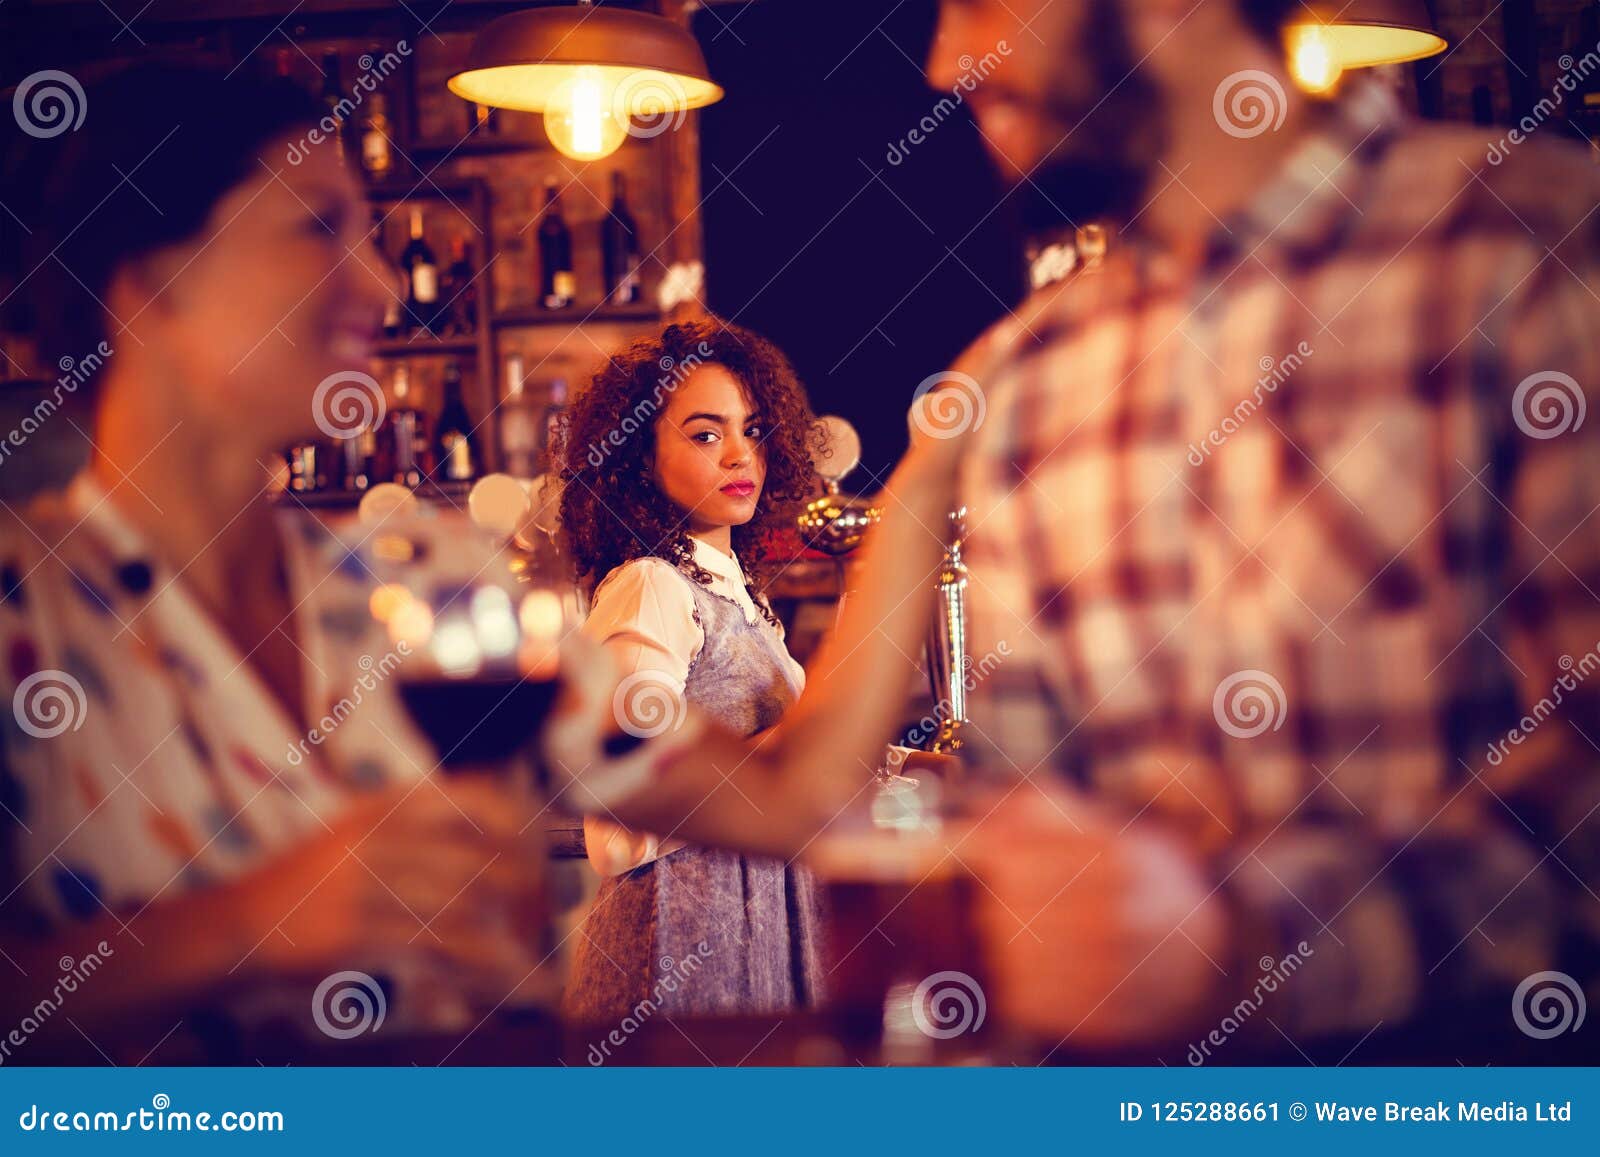 jealous woman looking at couple flirting with each other